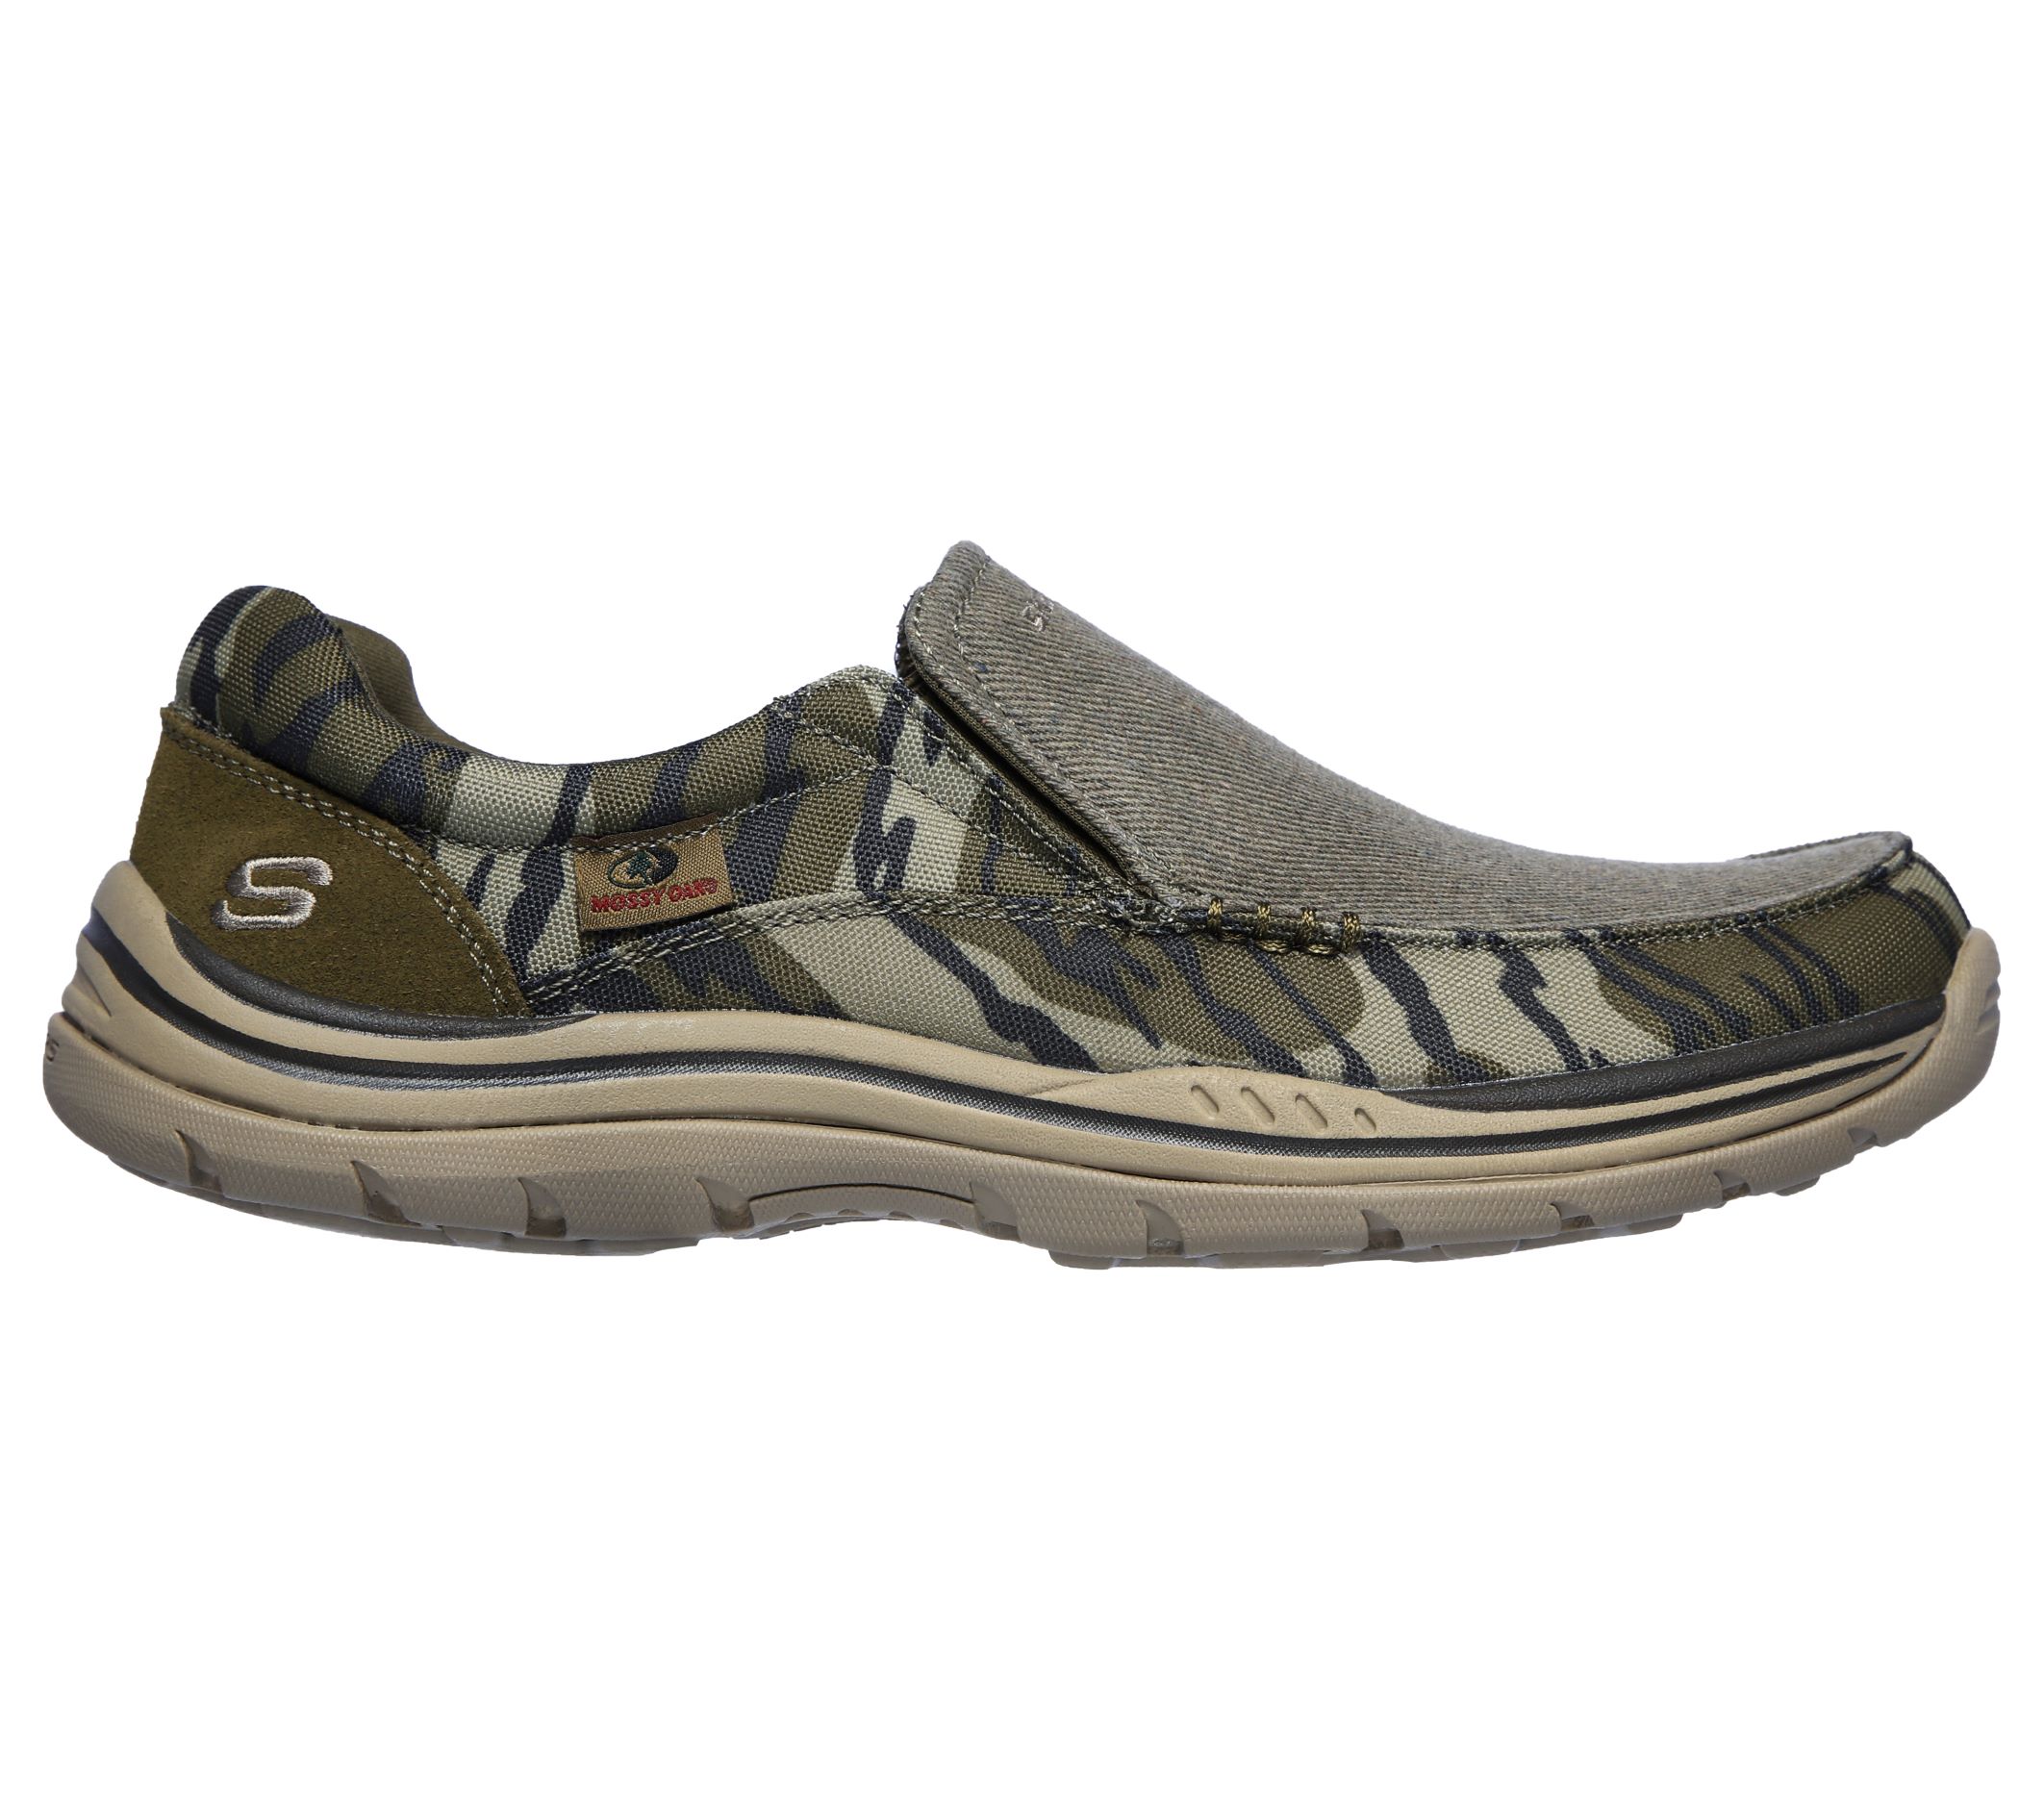 Skechers Men's Relaxed Fit Expected Avillo Casual Slip-on Shoe (Wide Width Available) - image 5 of 5